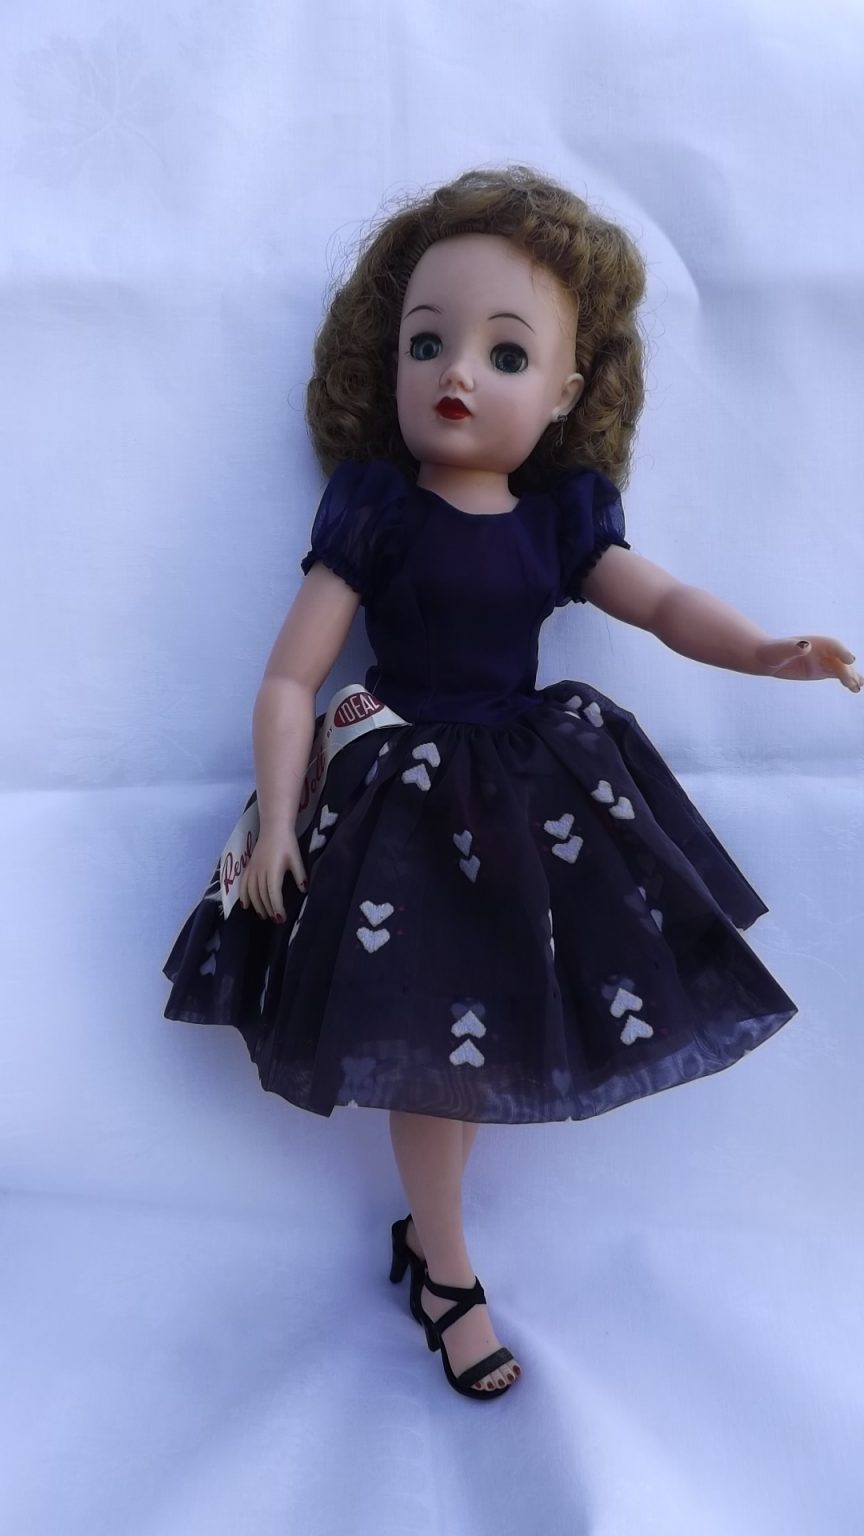 Ideal Vt 18 Doll Miss Revlon Kissing Hearts 1950s The Classic Doll